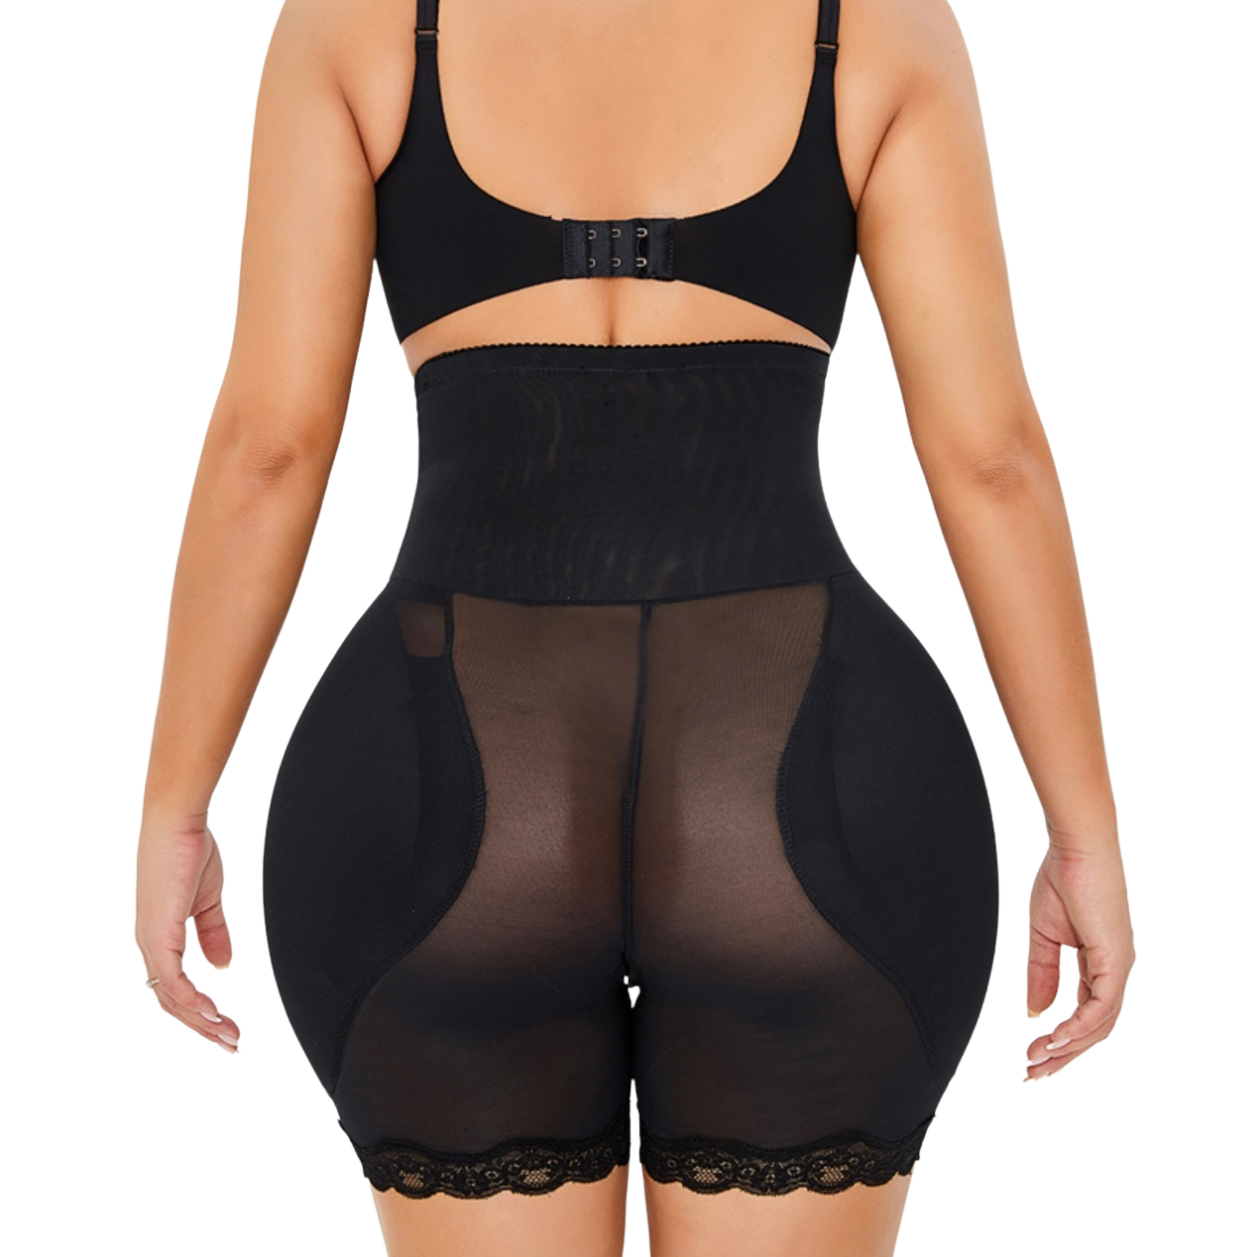 Curve short - 2 (high waist) hip/ butt pad with lace – Official